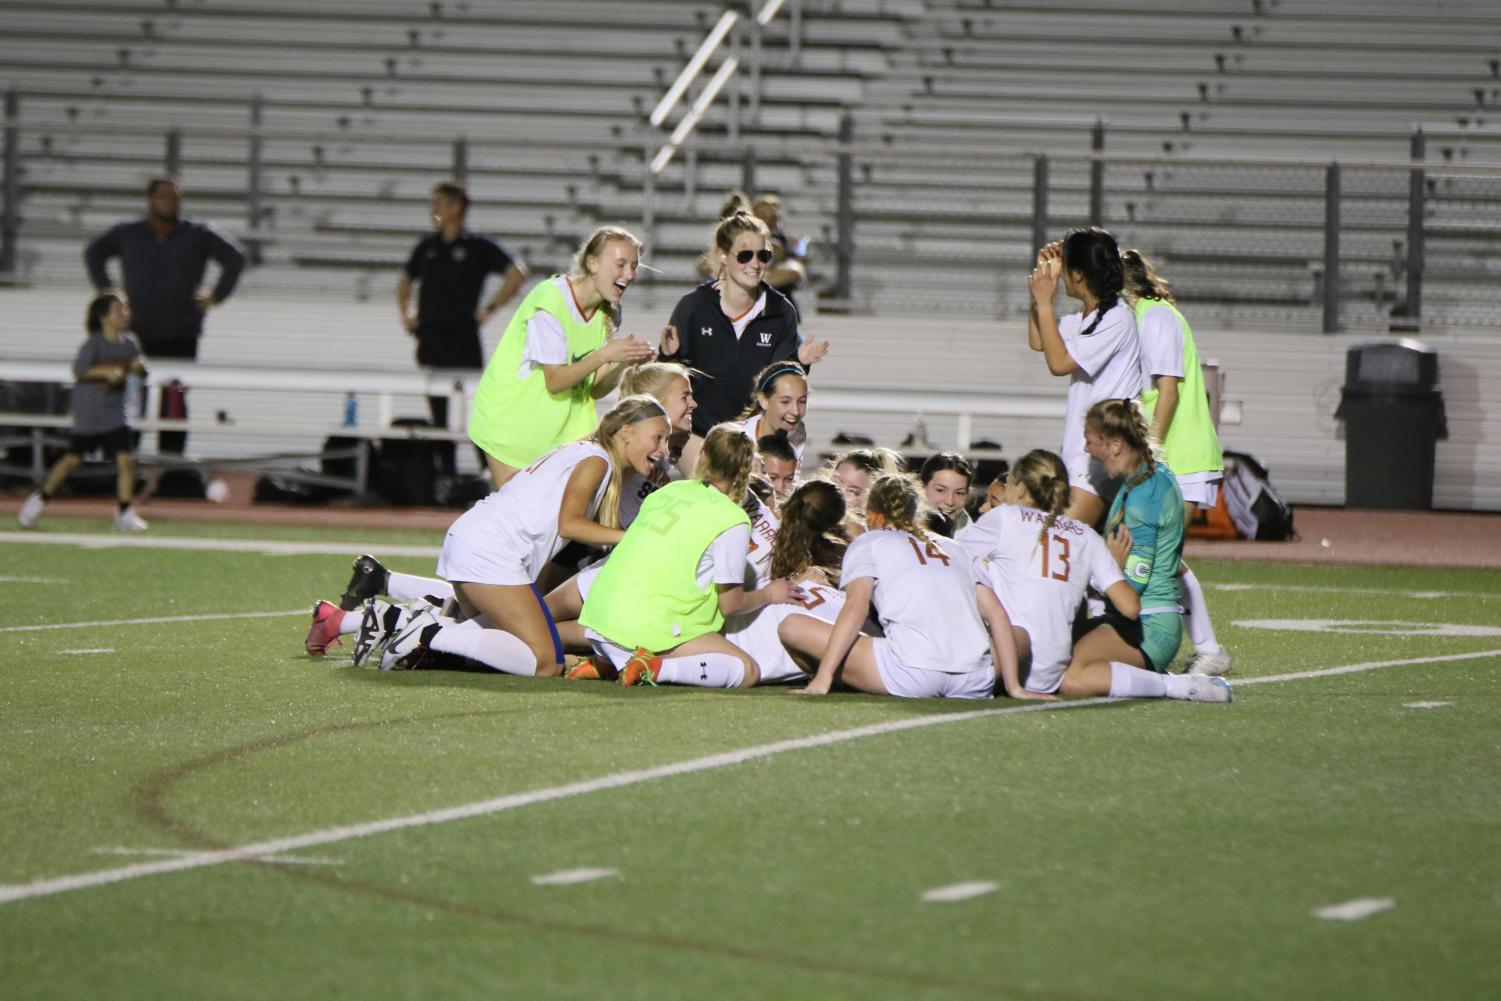 Varsity+Girls+Soccer+Advance+to+Round+Four+Playoffs+After+Dramatic+Showdown+Against+Vipers